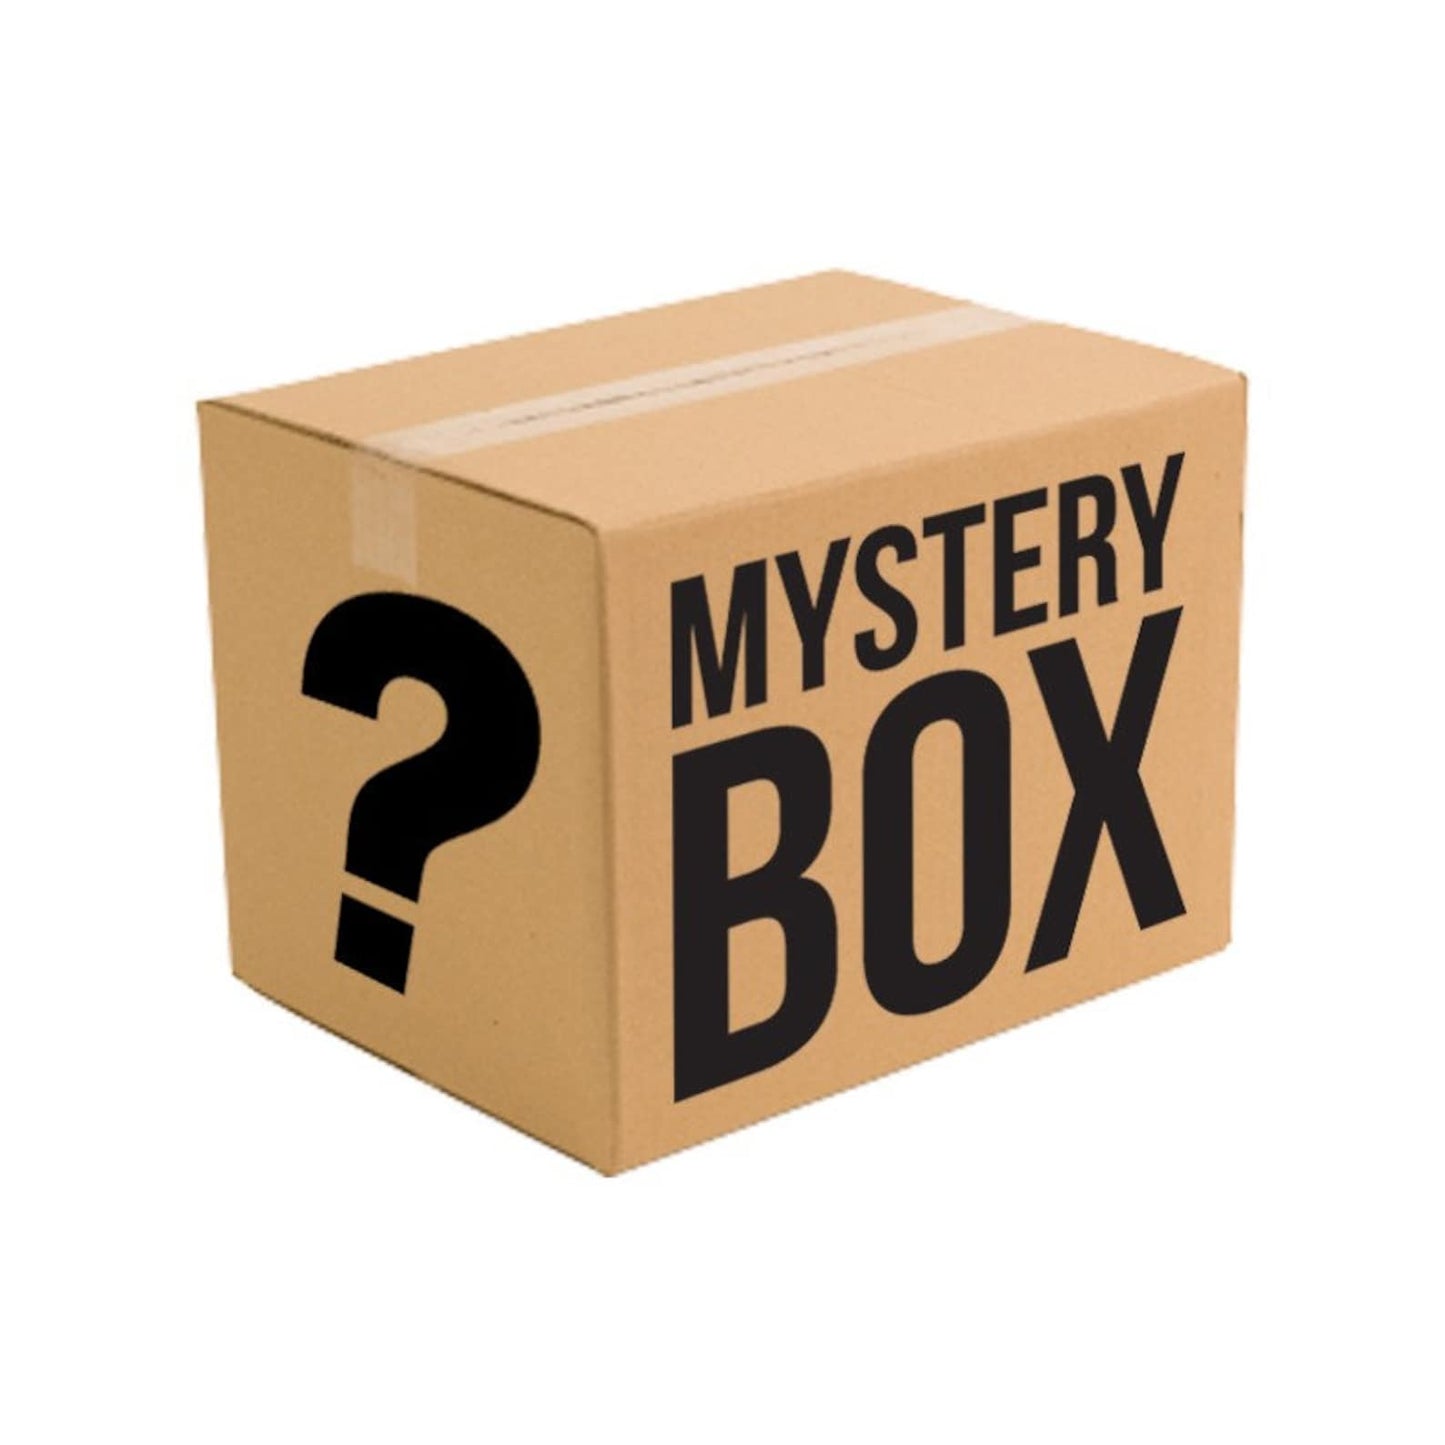 £20 Mystery Box with fur